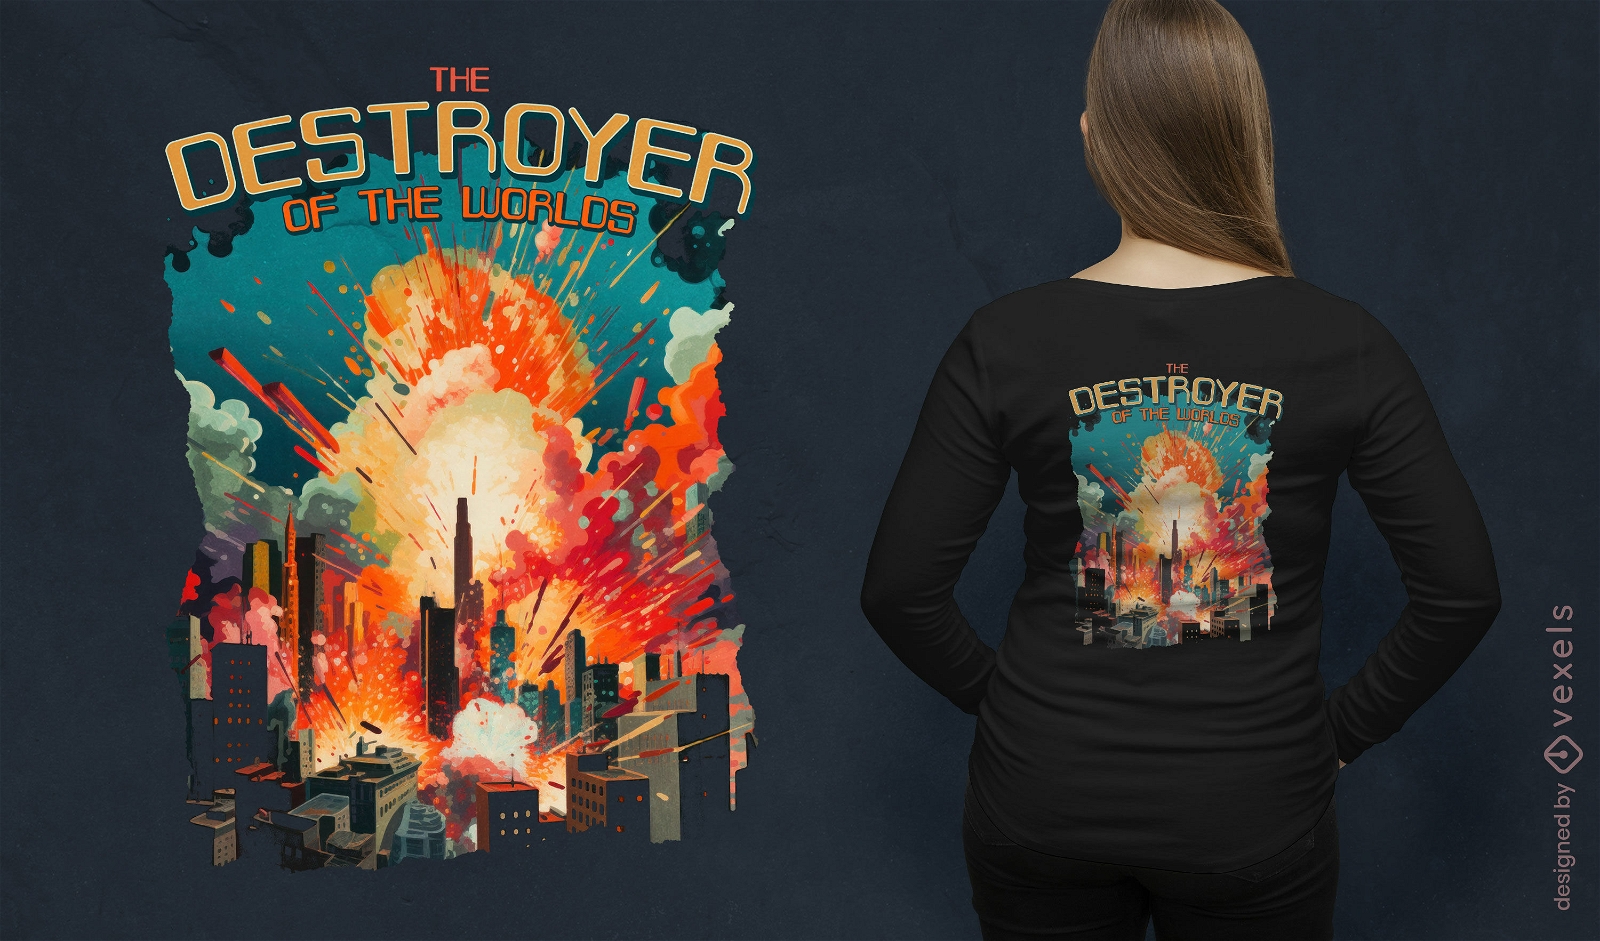 The destroyer of the worlds t-shirt design